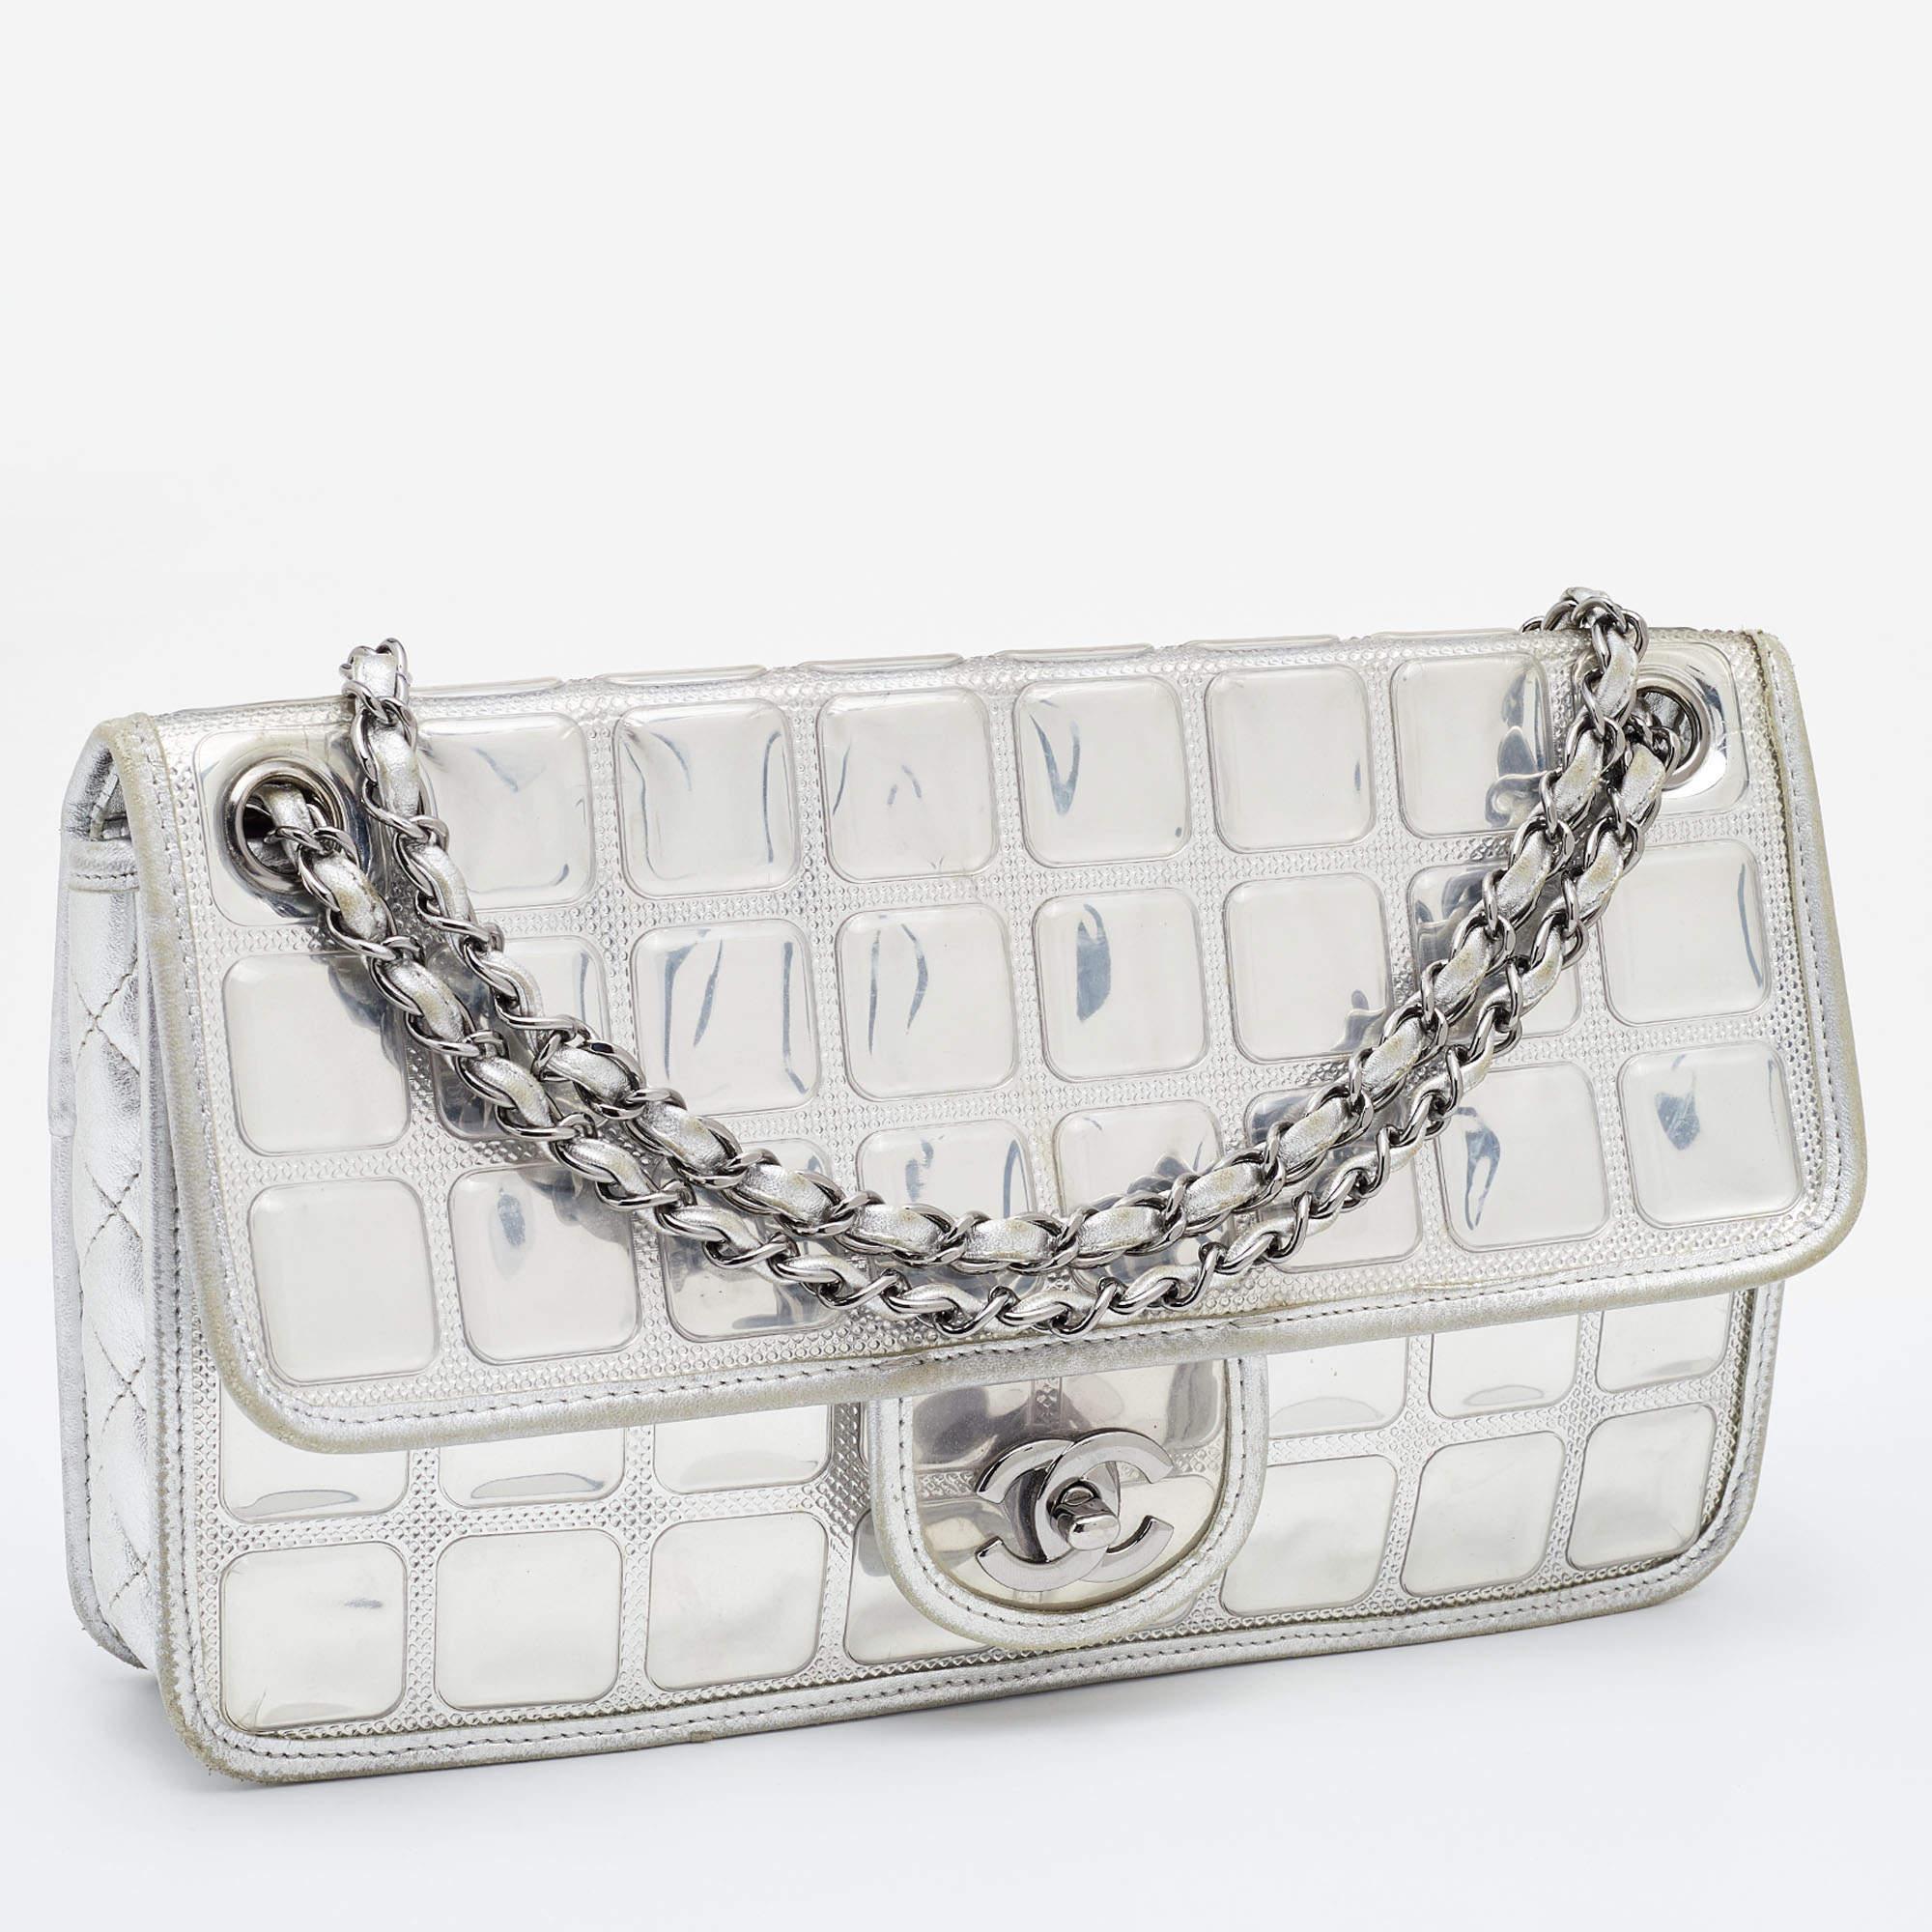 Women's Chanel Silver Chocolate Bar PVC and Leather Ice Cube Flap Shoulder Bag